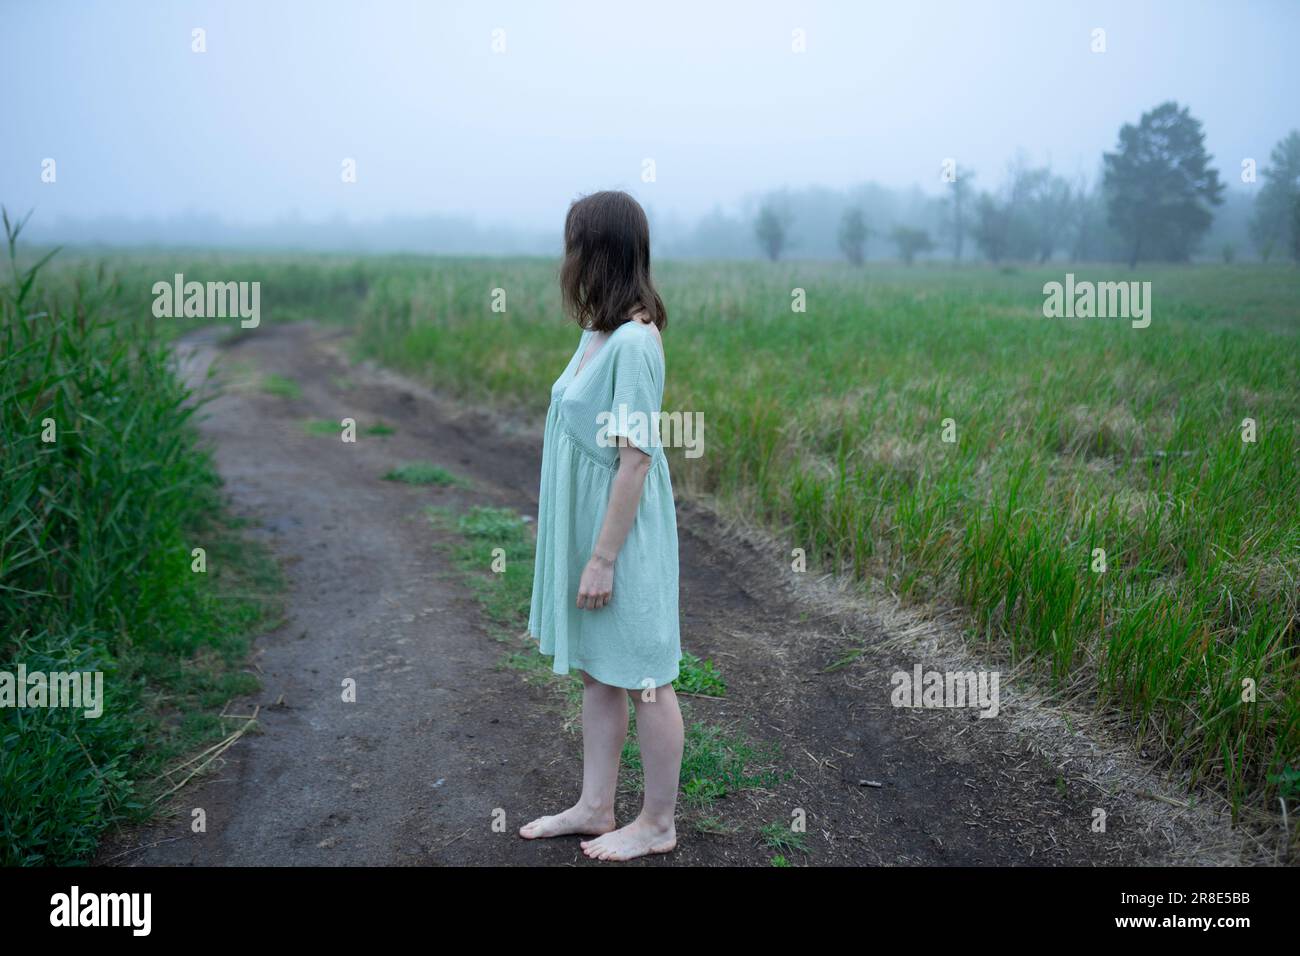 Woman standing on dirt road and looking away Stock Photo